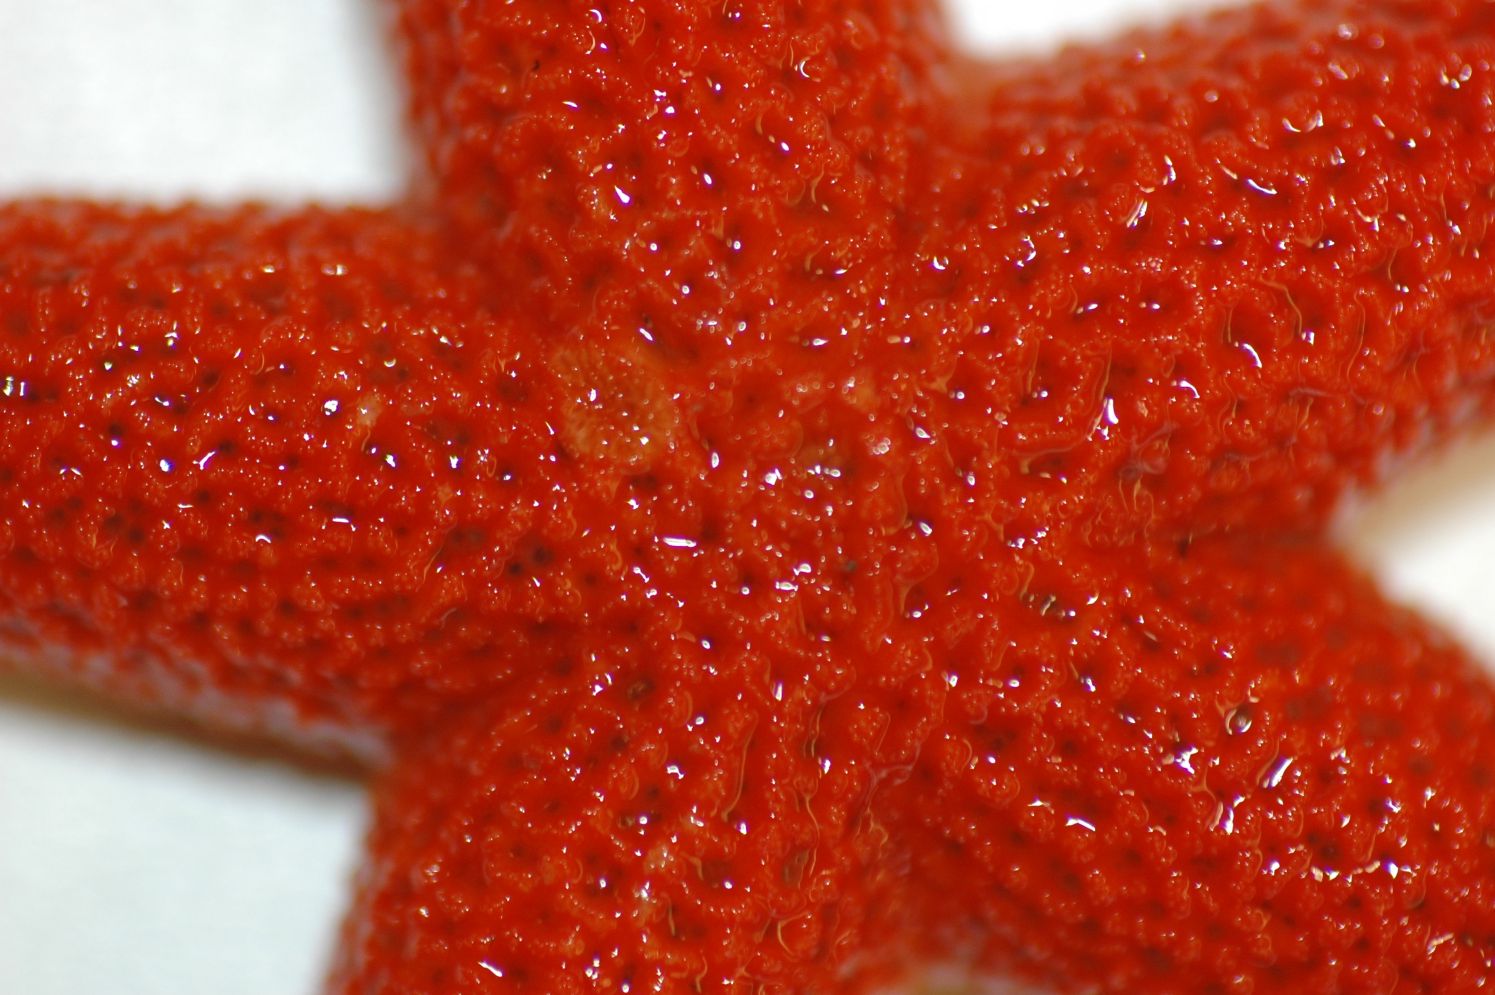 A close-up of the top of a red sea star showing its pitted skin.